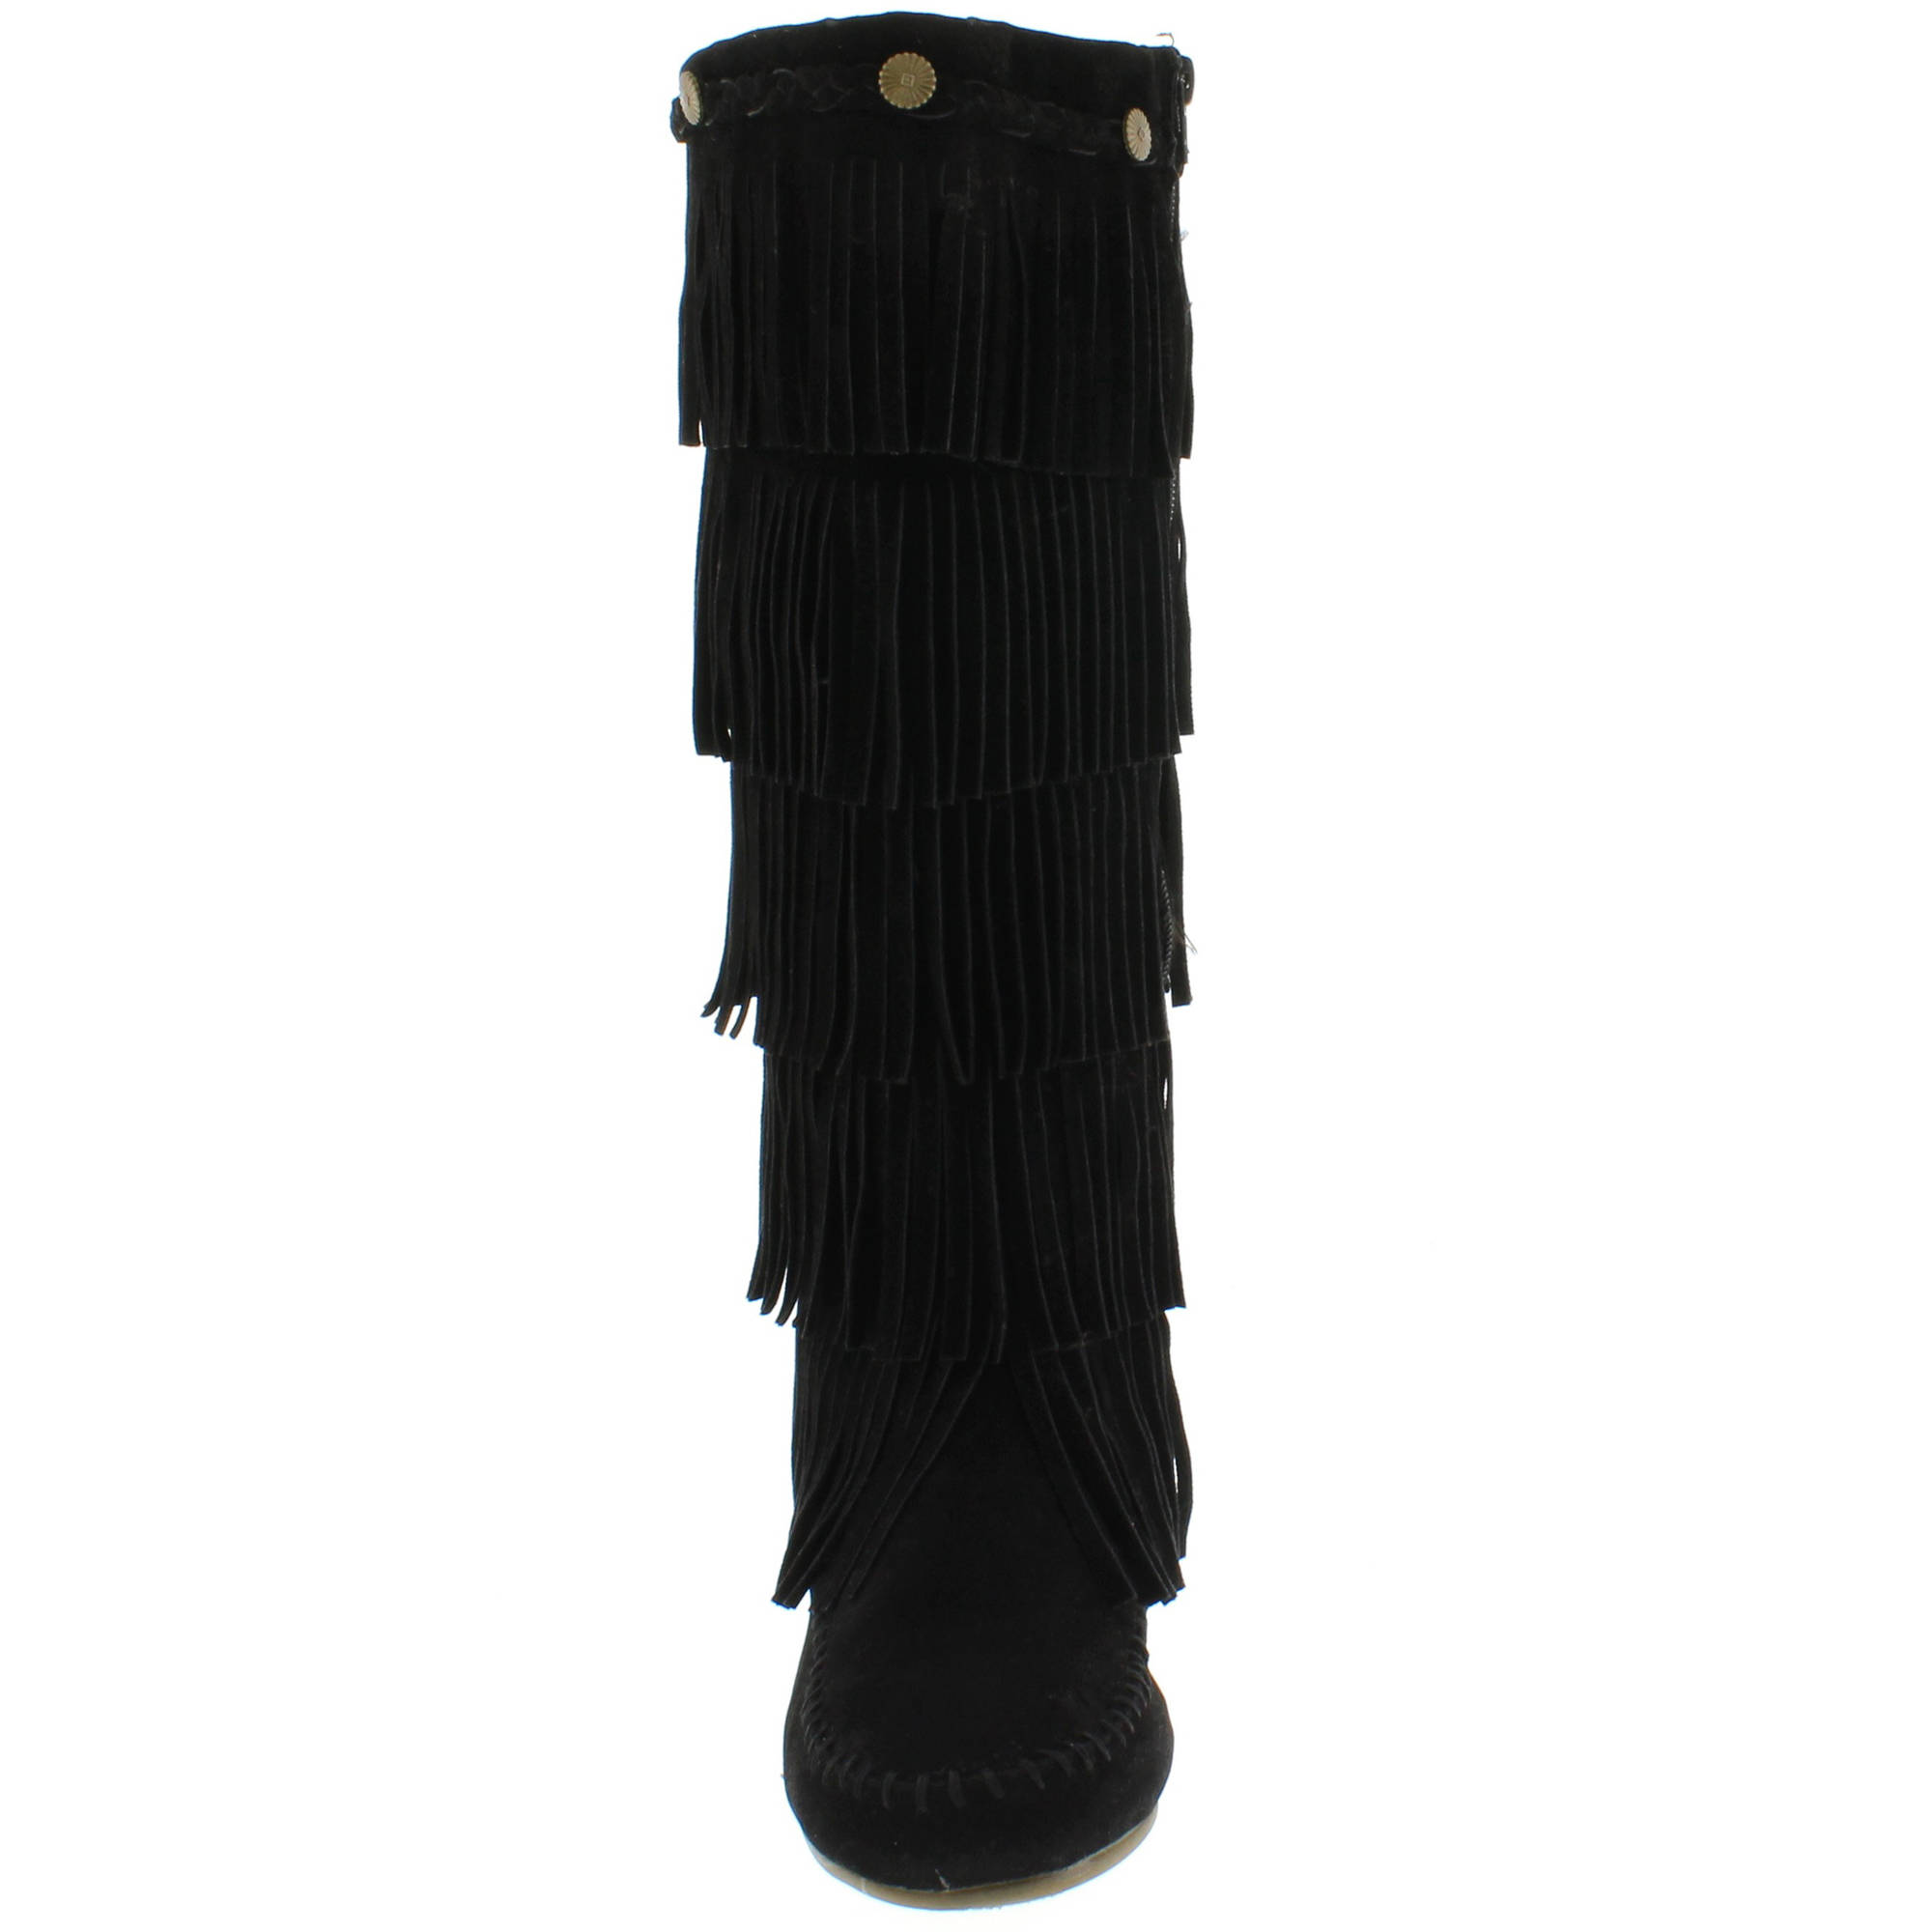 Shoes of Soul Women's Layer Fringe Boots - image 3 of 4